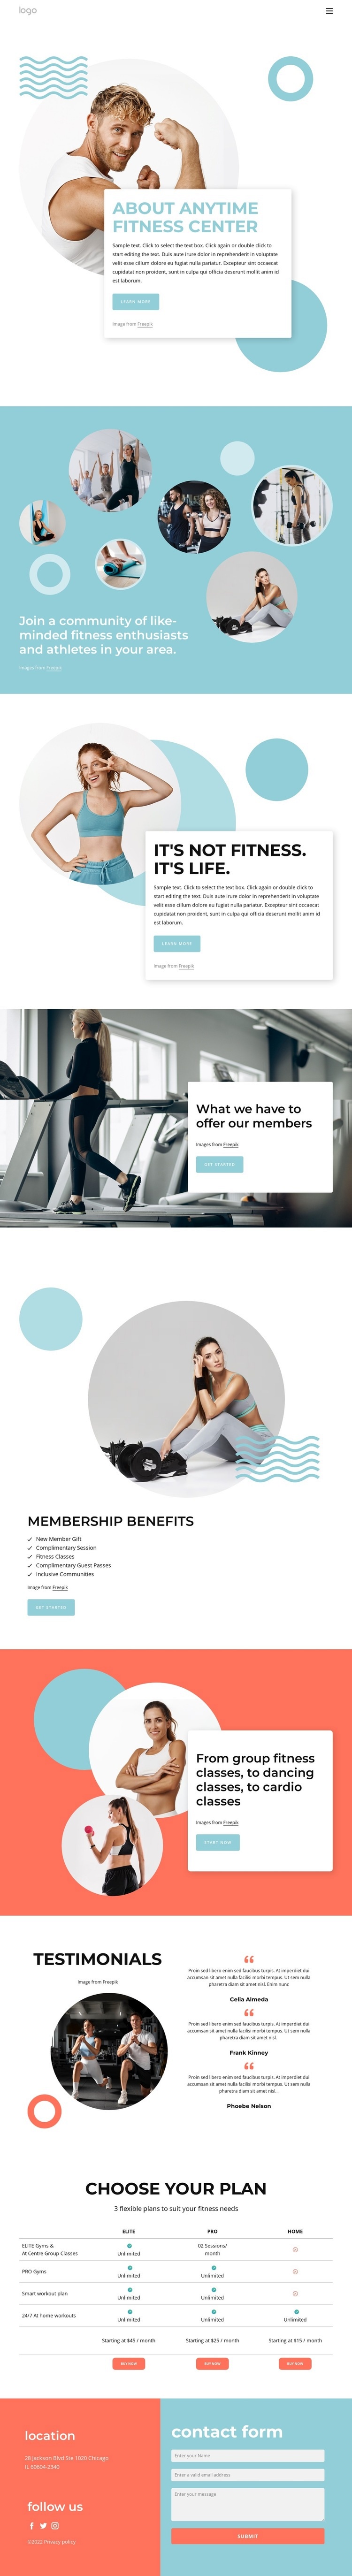 About Anytime fitness center Wix Template Alternative